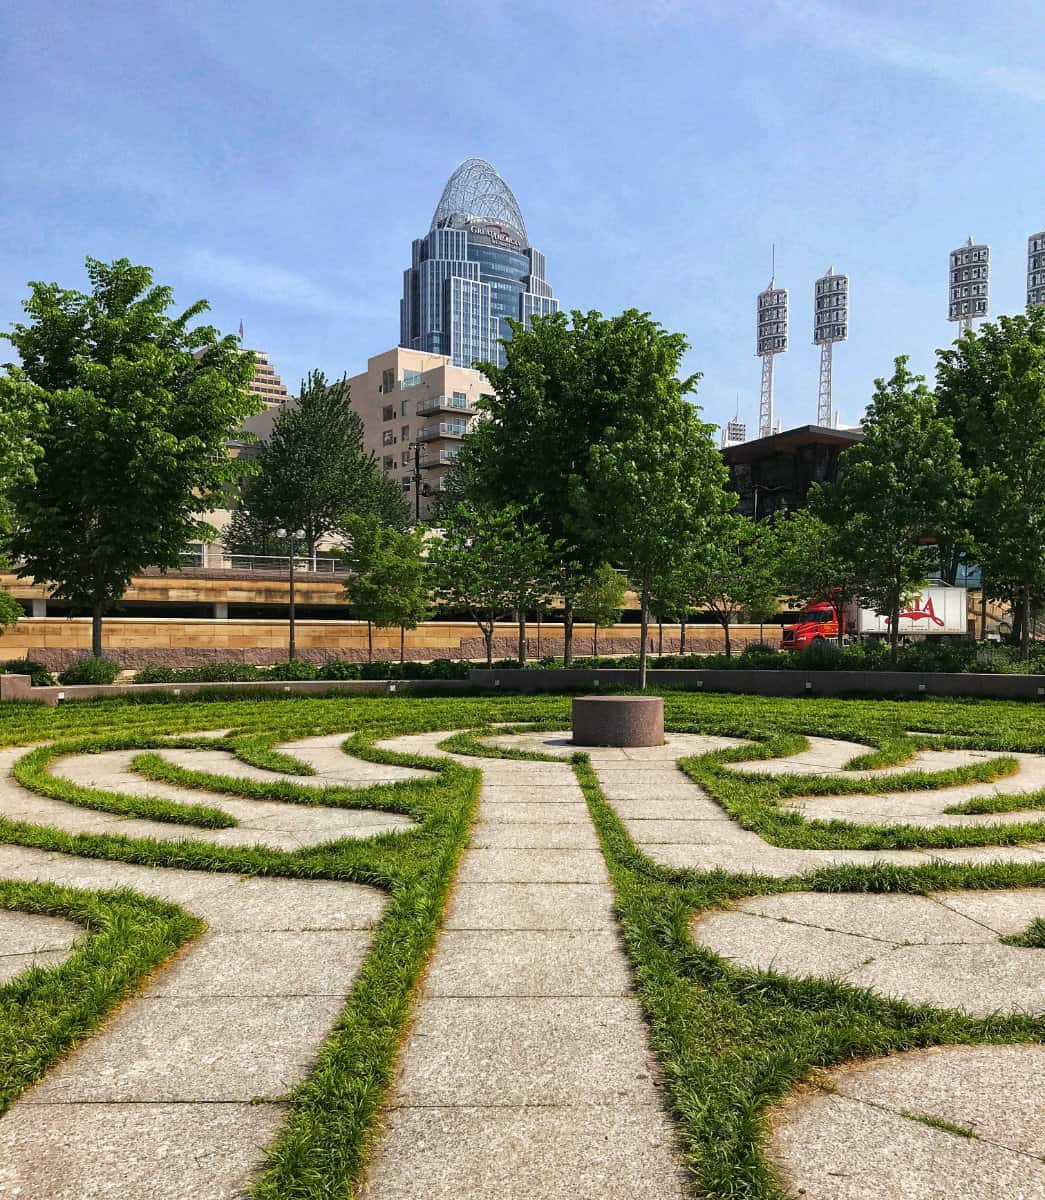 The labryinth maze at Smale Park